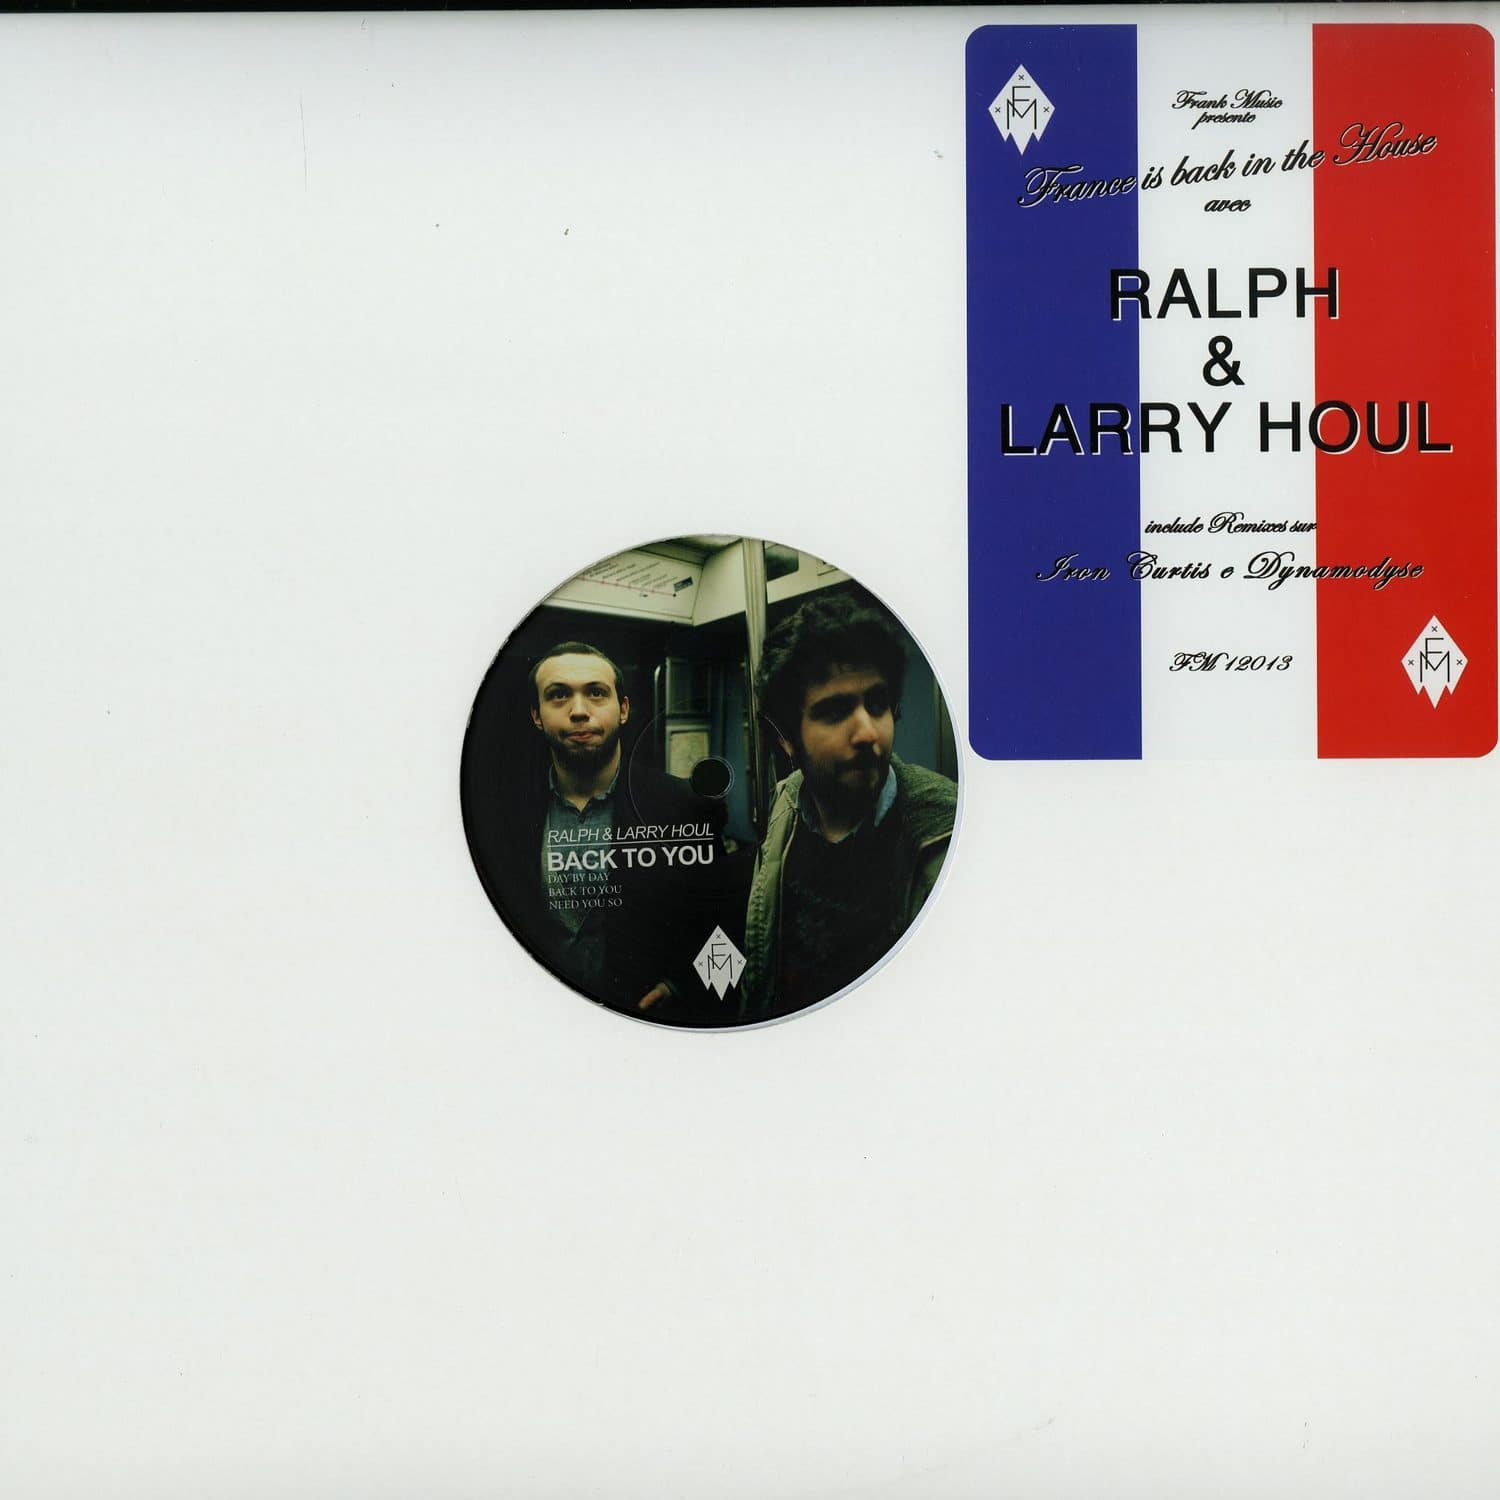 Ralph & Larry Houl - BACK TO YOU 